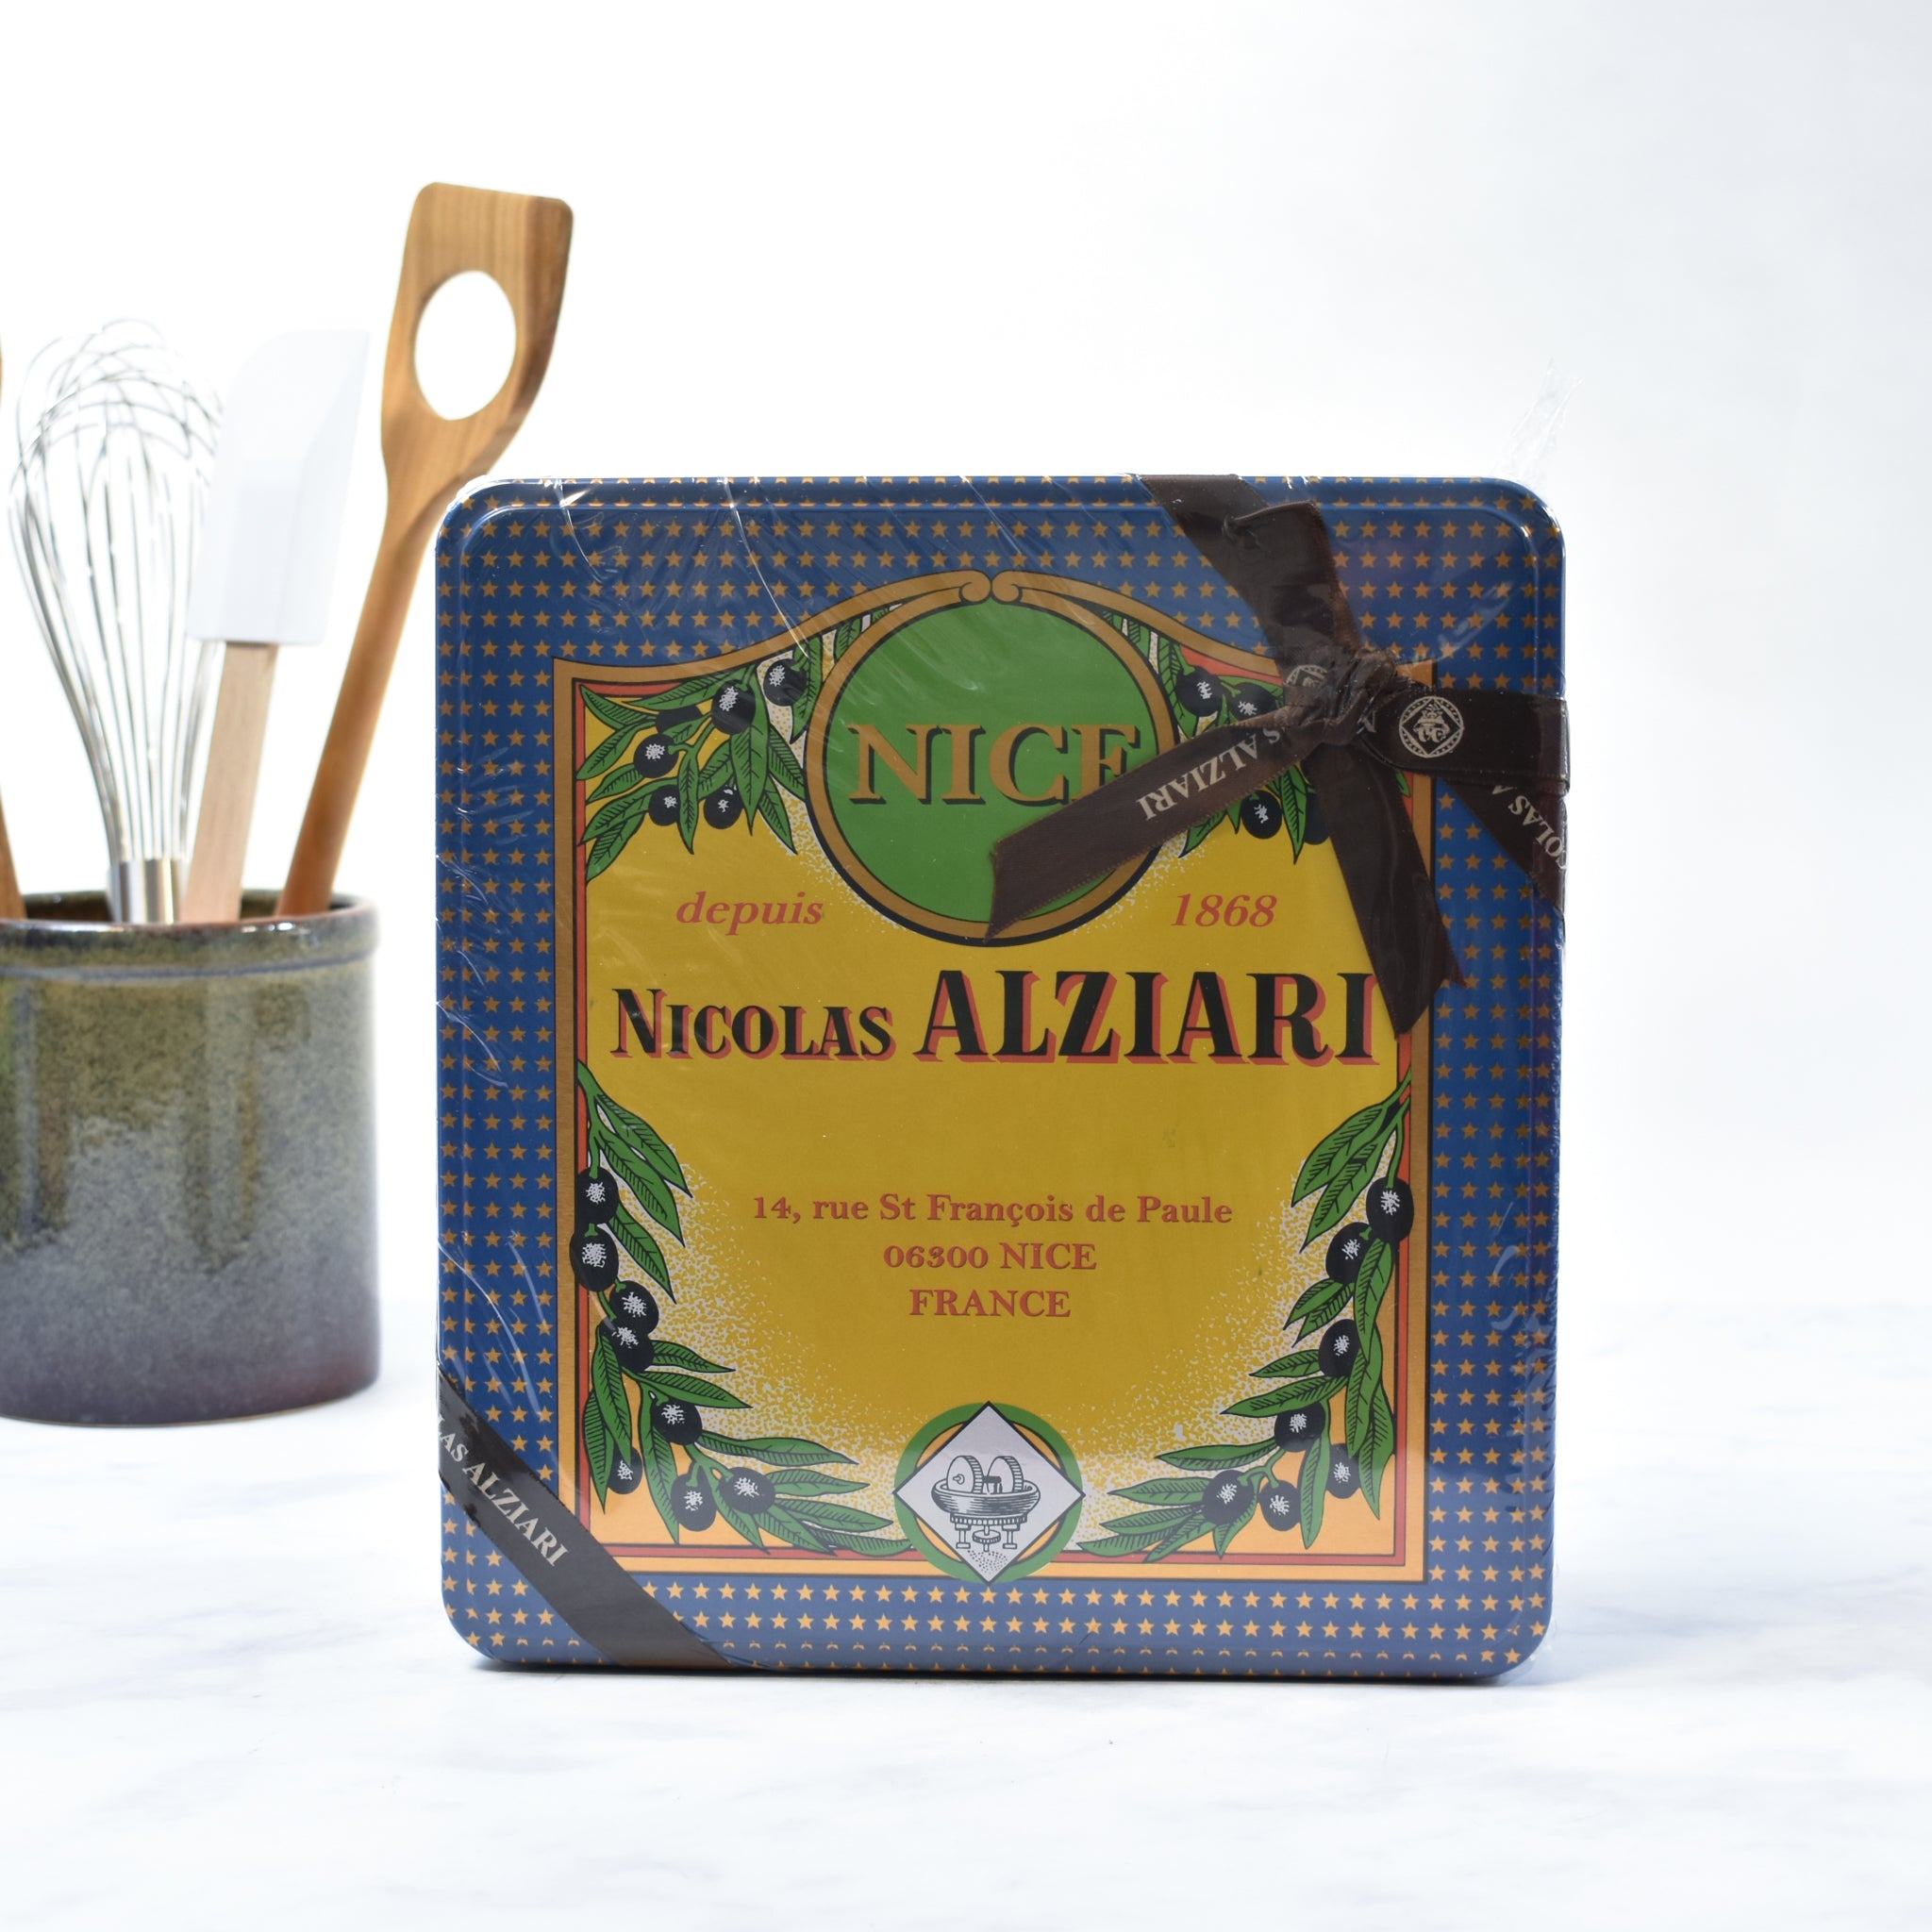 Nicolas Alziari Alziari Provence Olive Oil Gift Box Ingredients Oils & Vinegars French Food & Recipes Lifestyle Packaging Shot